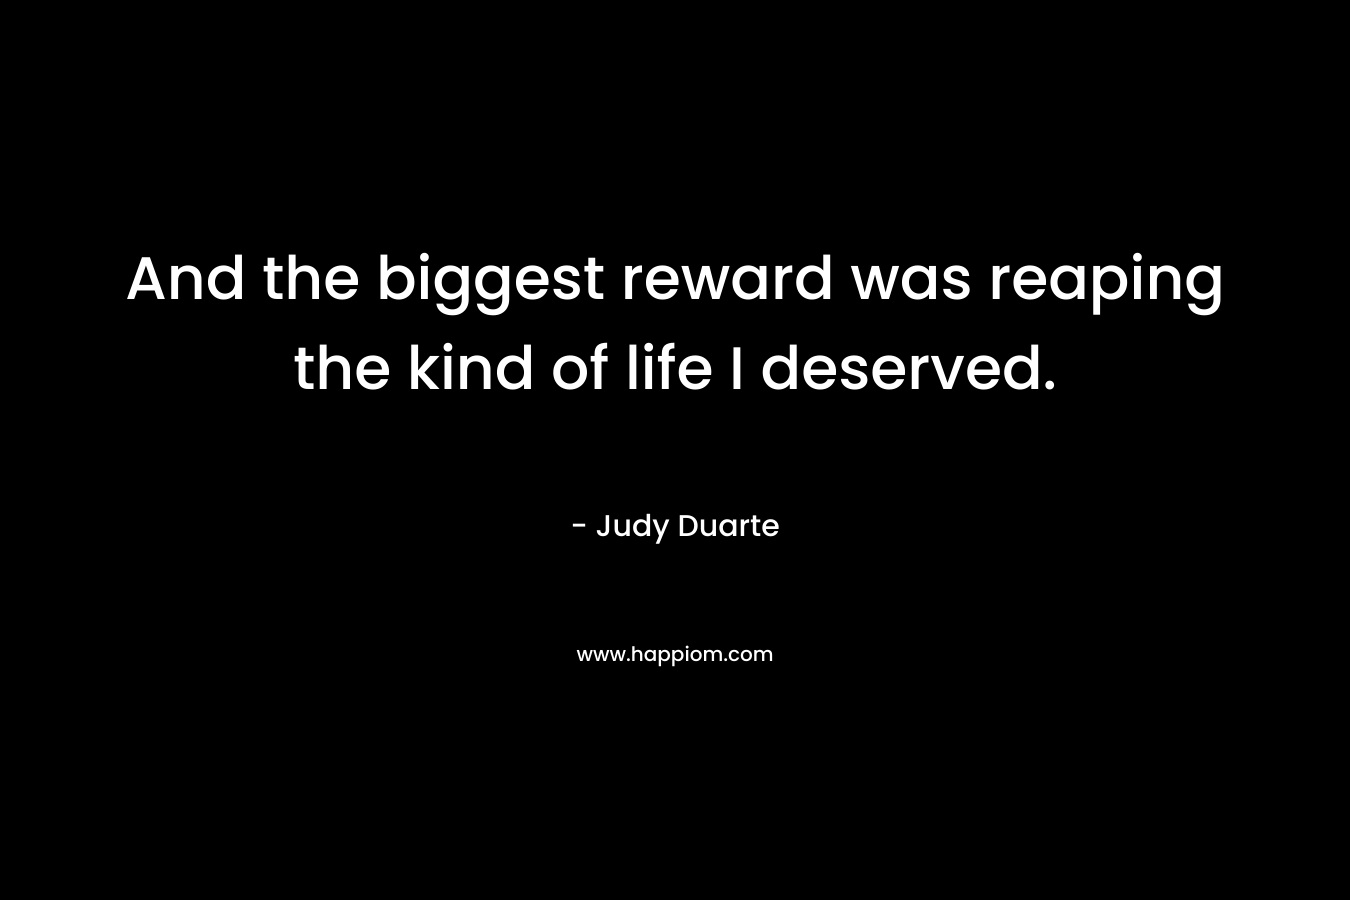 And the biggest reward was reaping the kind of life I deserved. – Judy Duarte